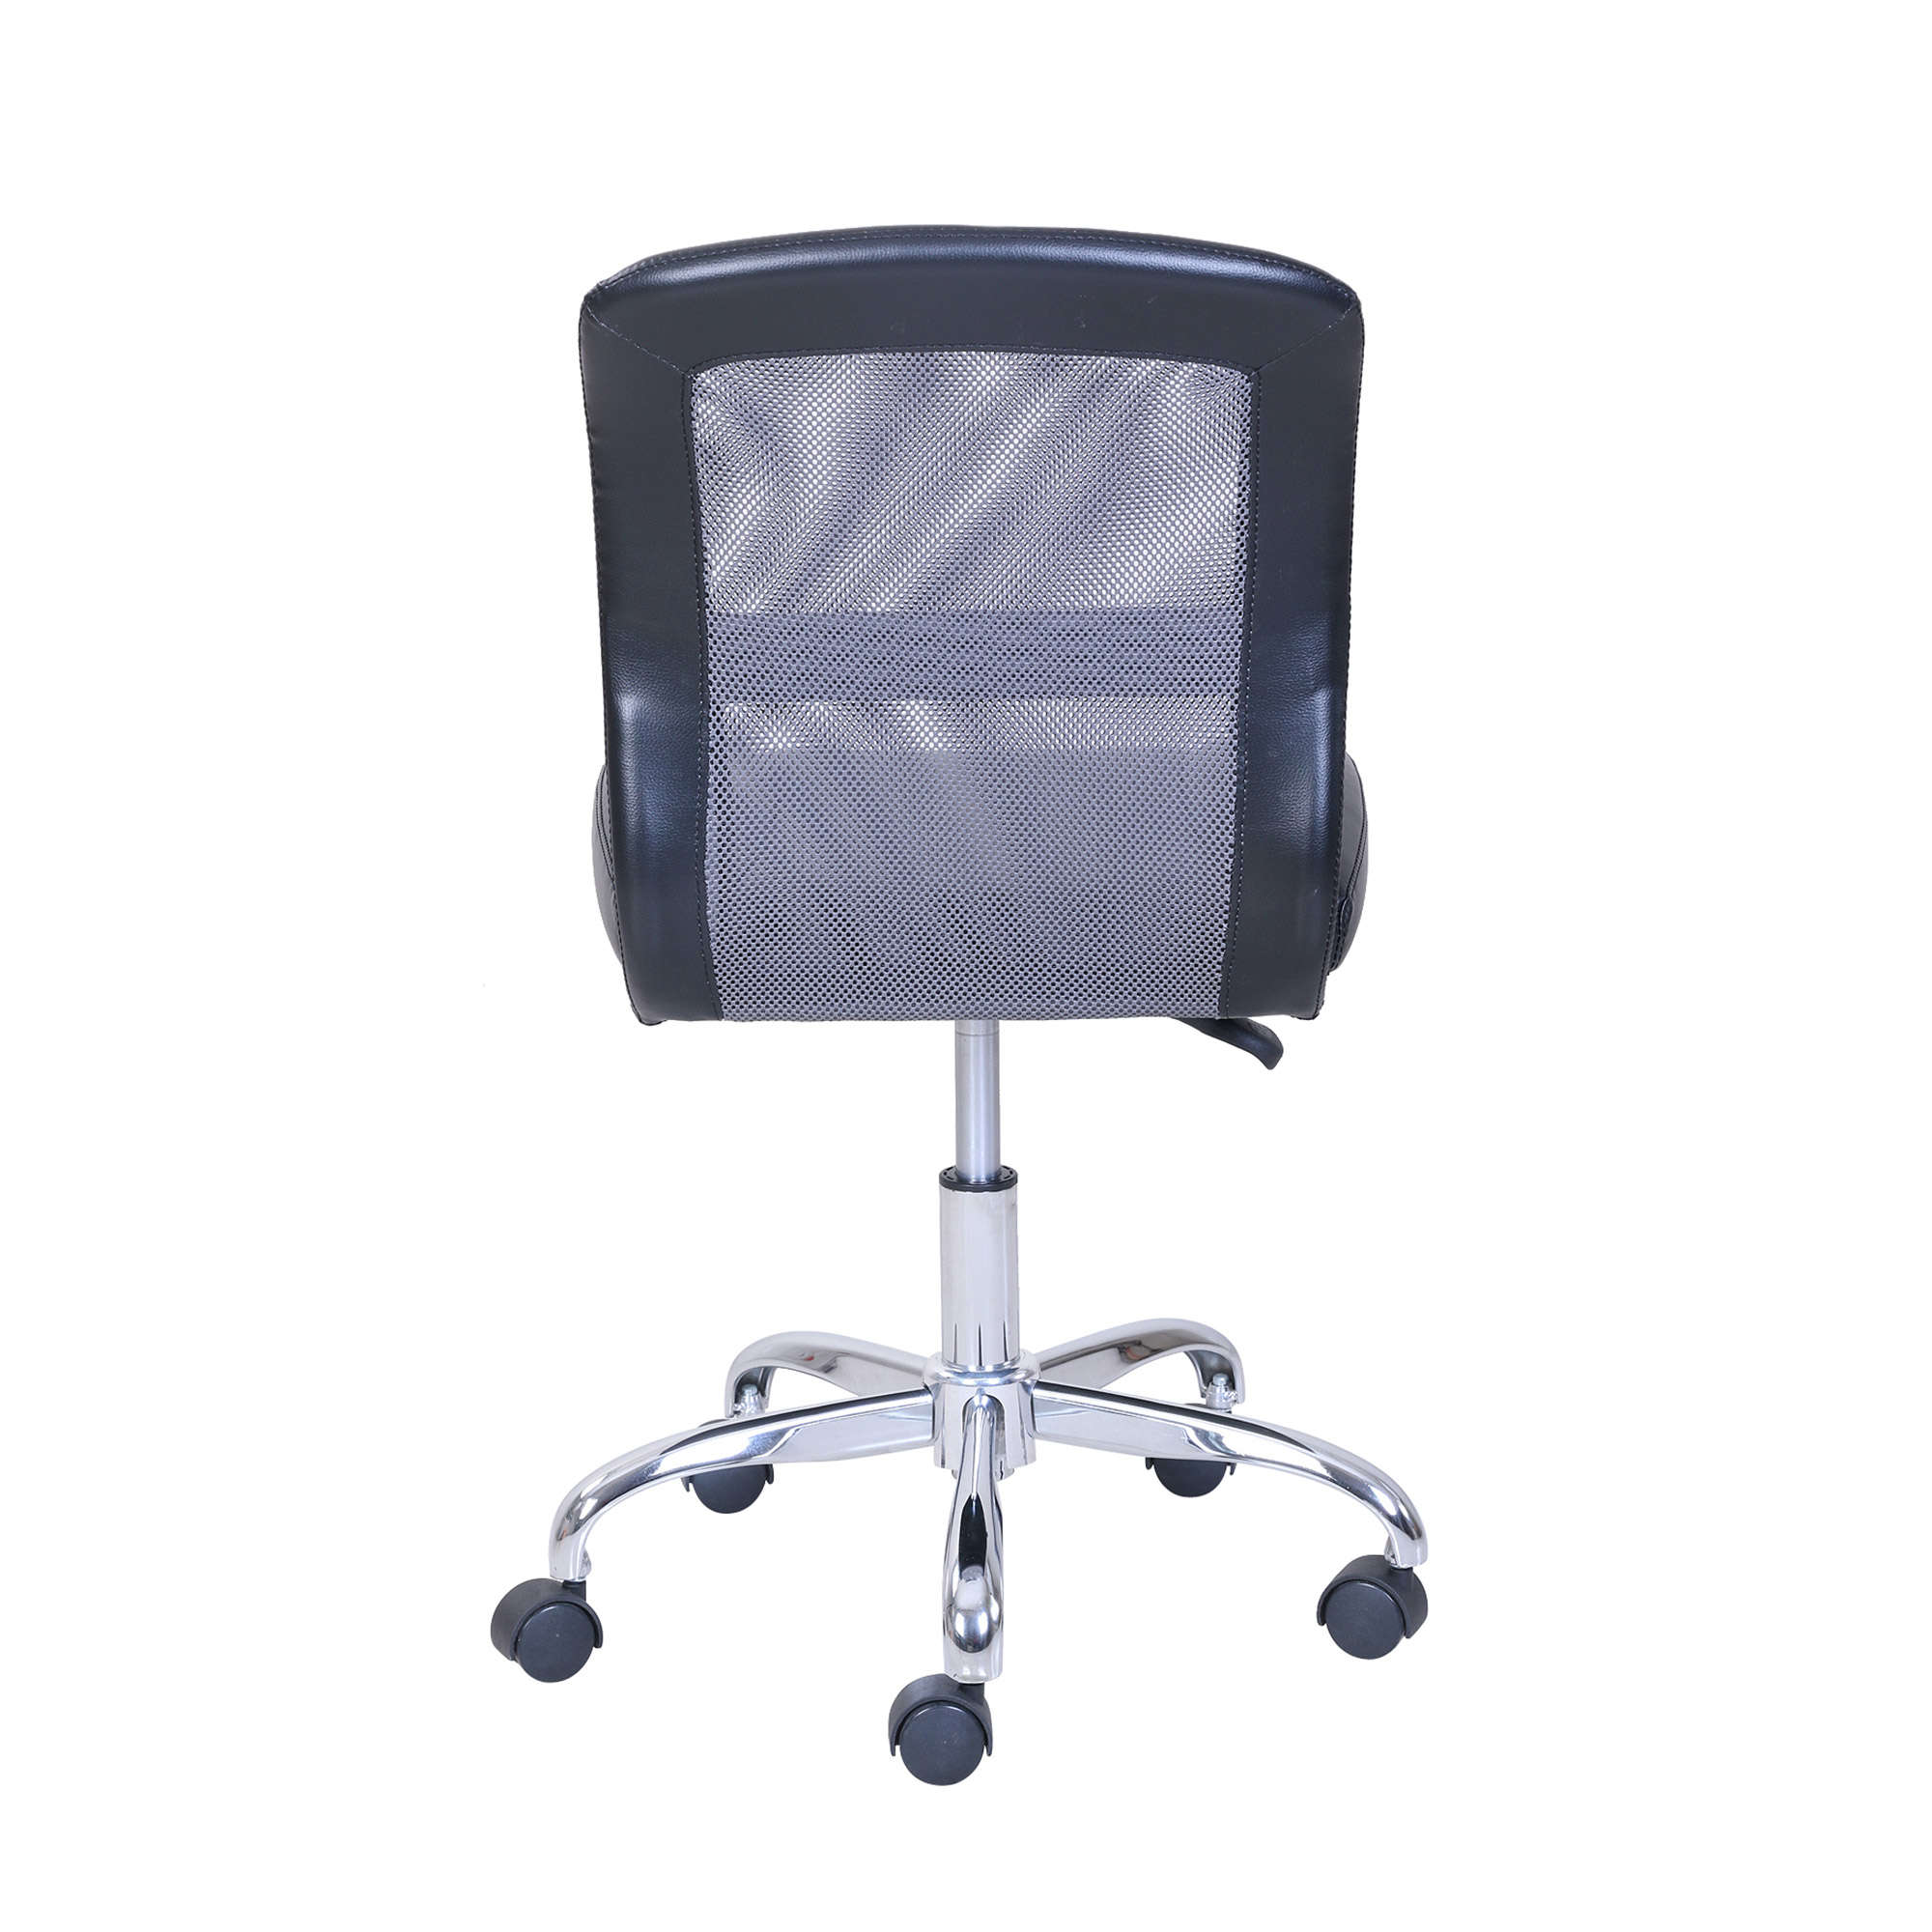 Mainstays Mid-Back, Vinyl Mesh Task Office Chair, Black and Gray - image 5 of 5